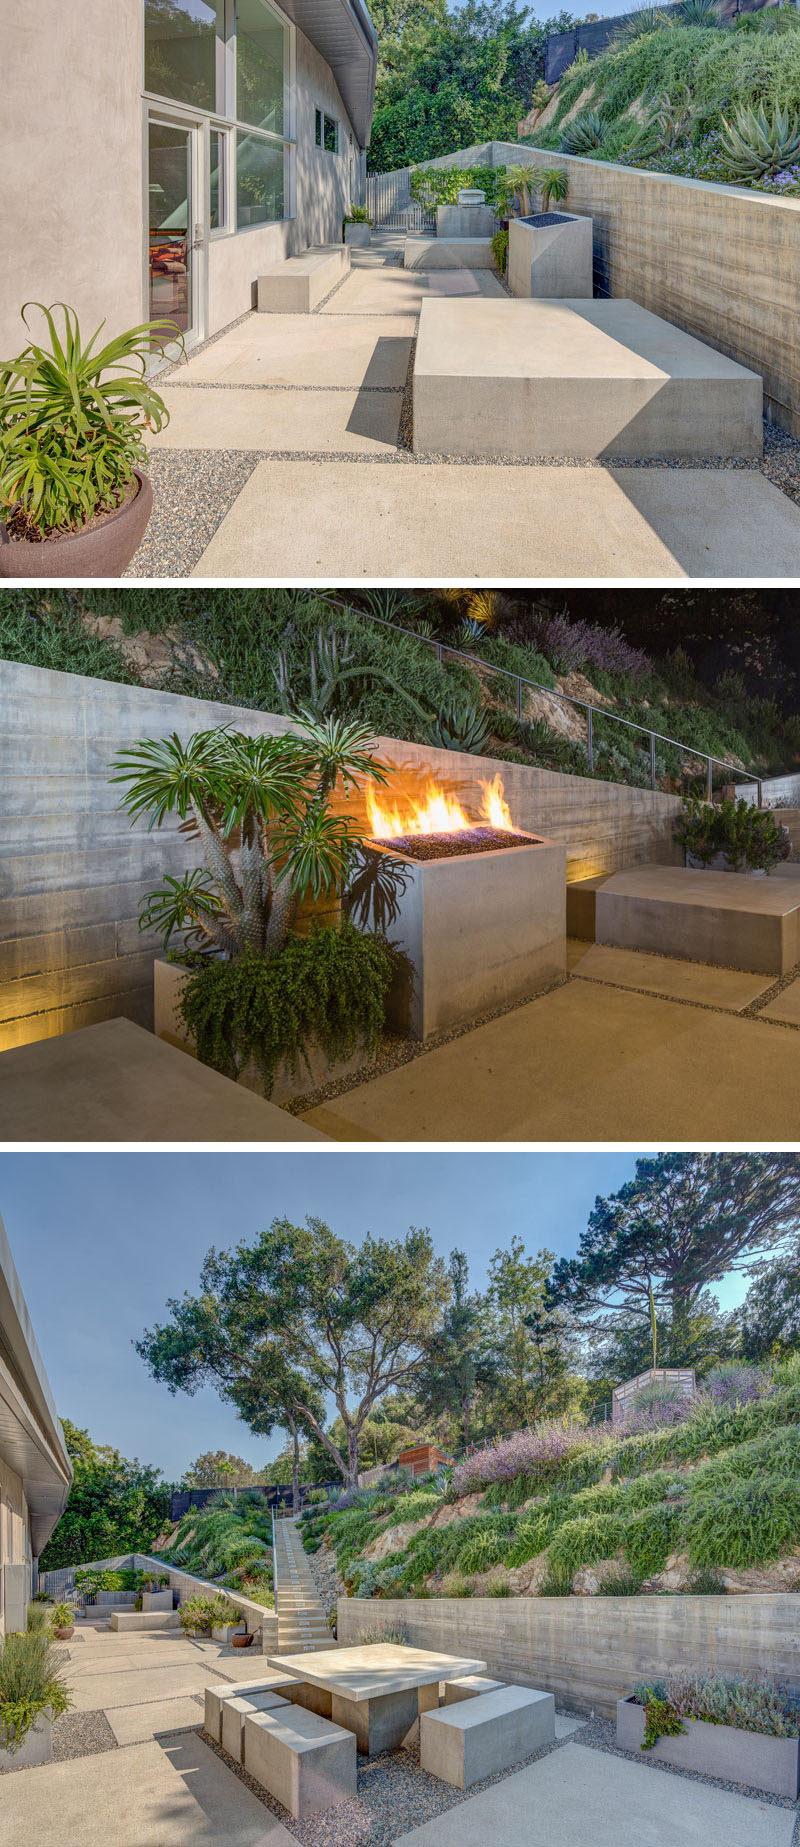 This modern house has a landscaped patio with various concrete blocks that create a variety of sitting options, and an outdoor fireplace. #ModernLandscaping #OutdoorFireplace